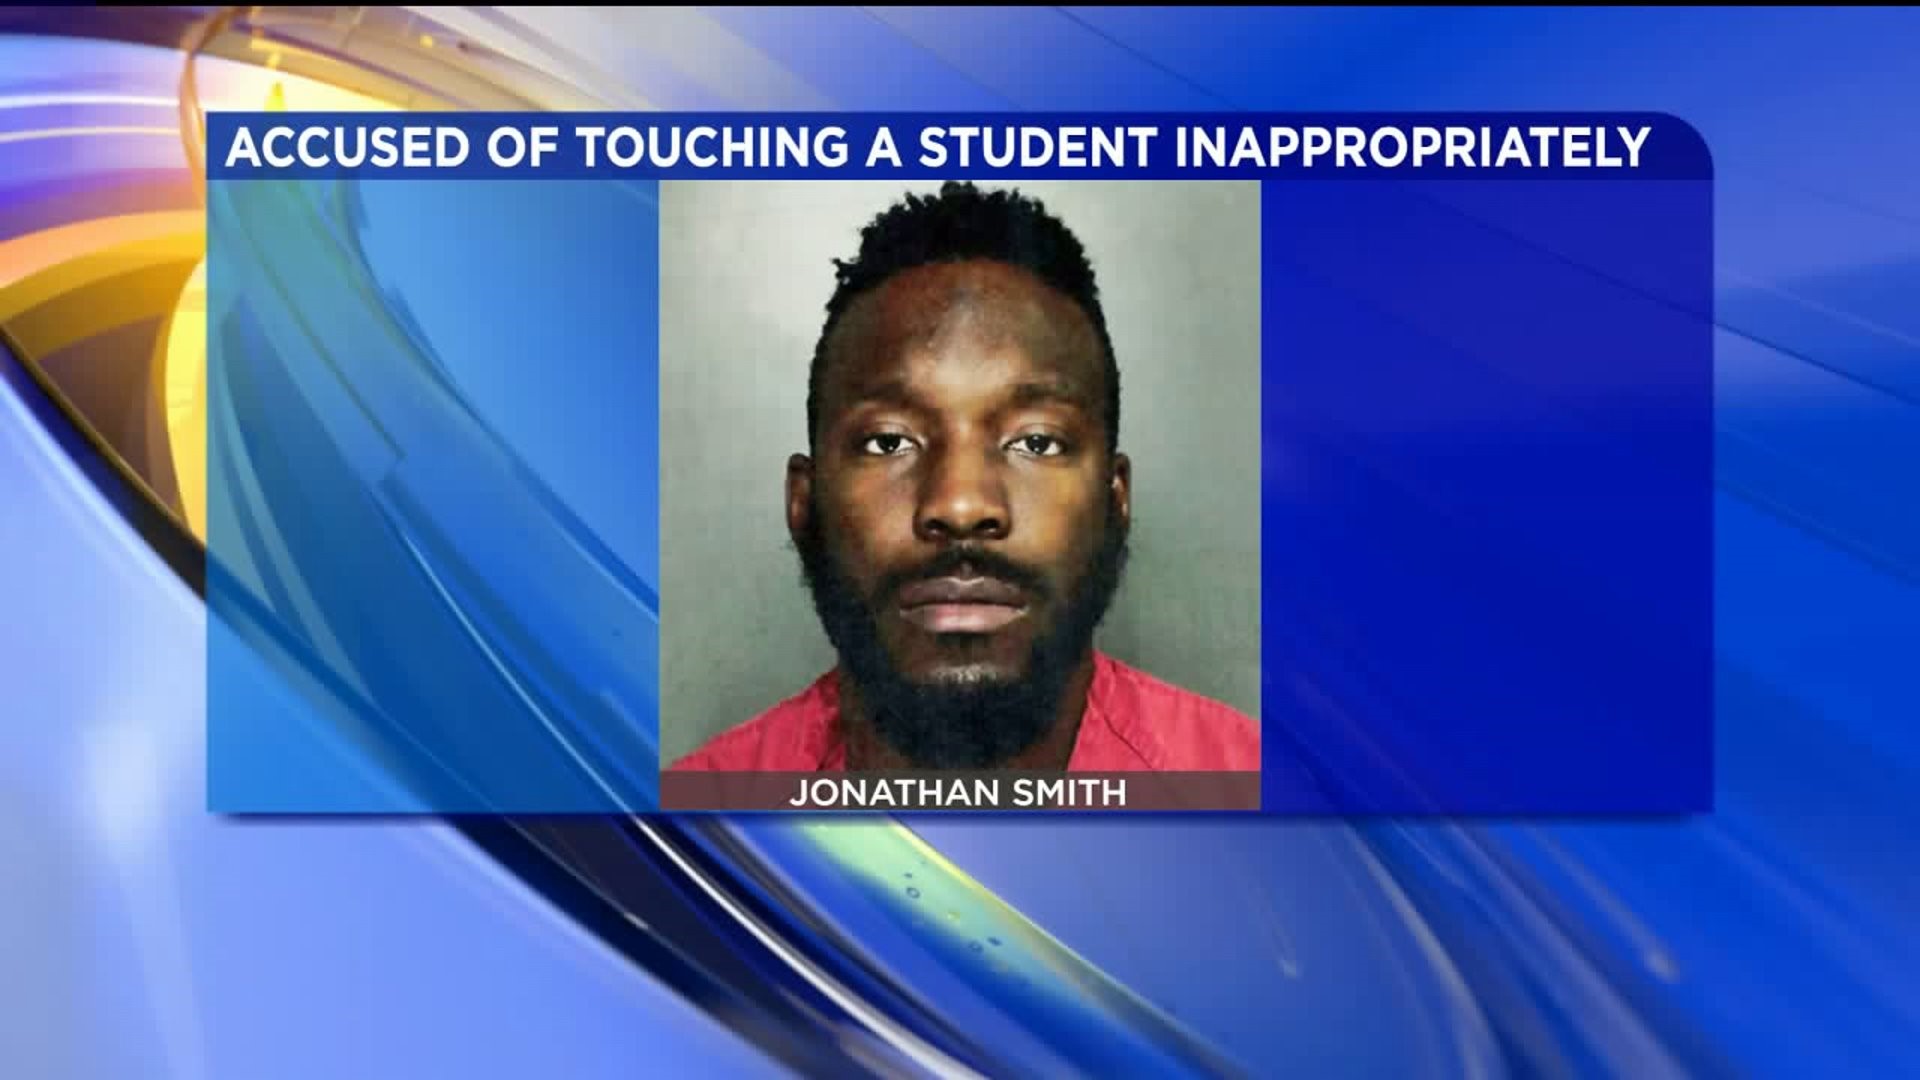 Monroe County Teacher Locked Up, Accused of Inappropriately Touching Student